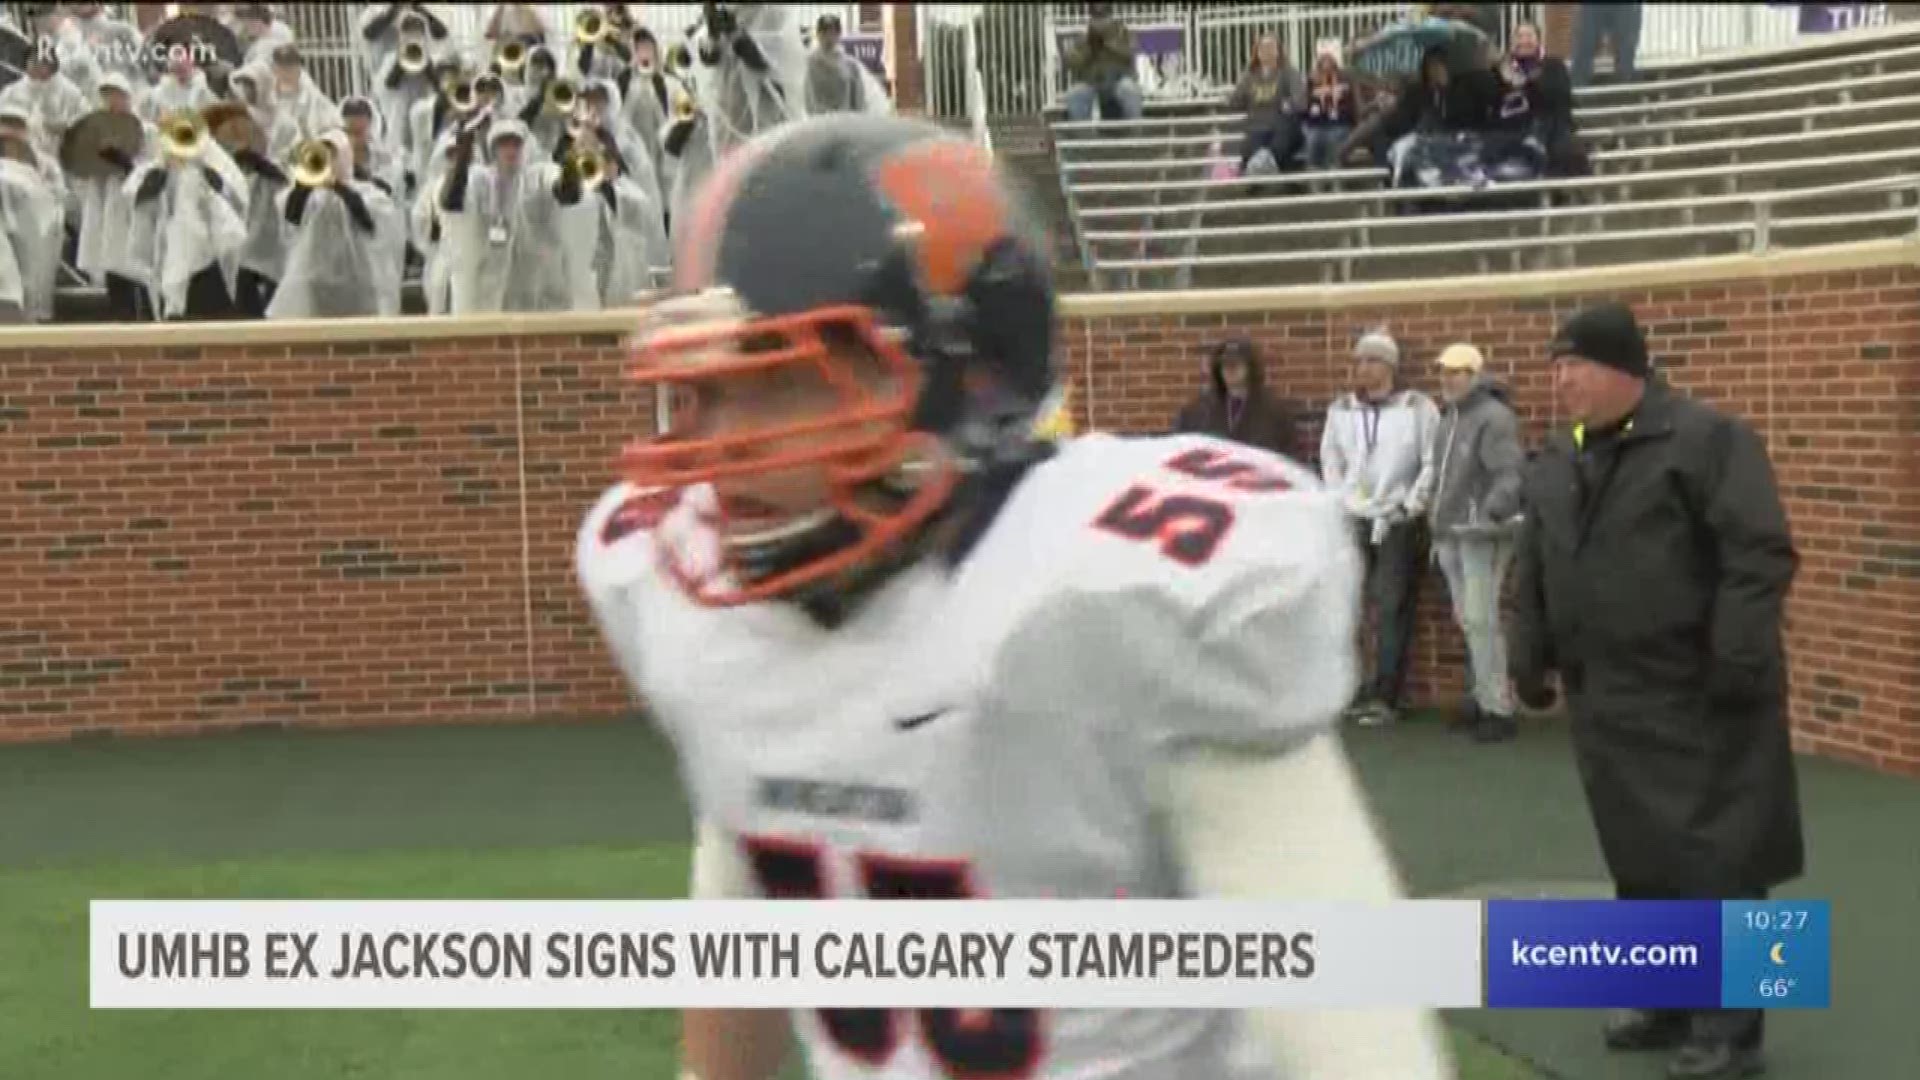 The former all-American has signed with the Calgary Stampeders of the Canadian Football League. 